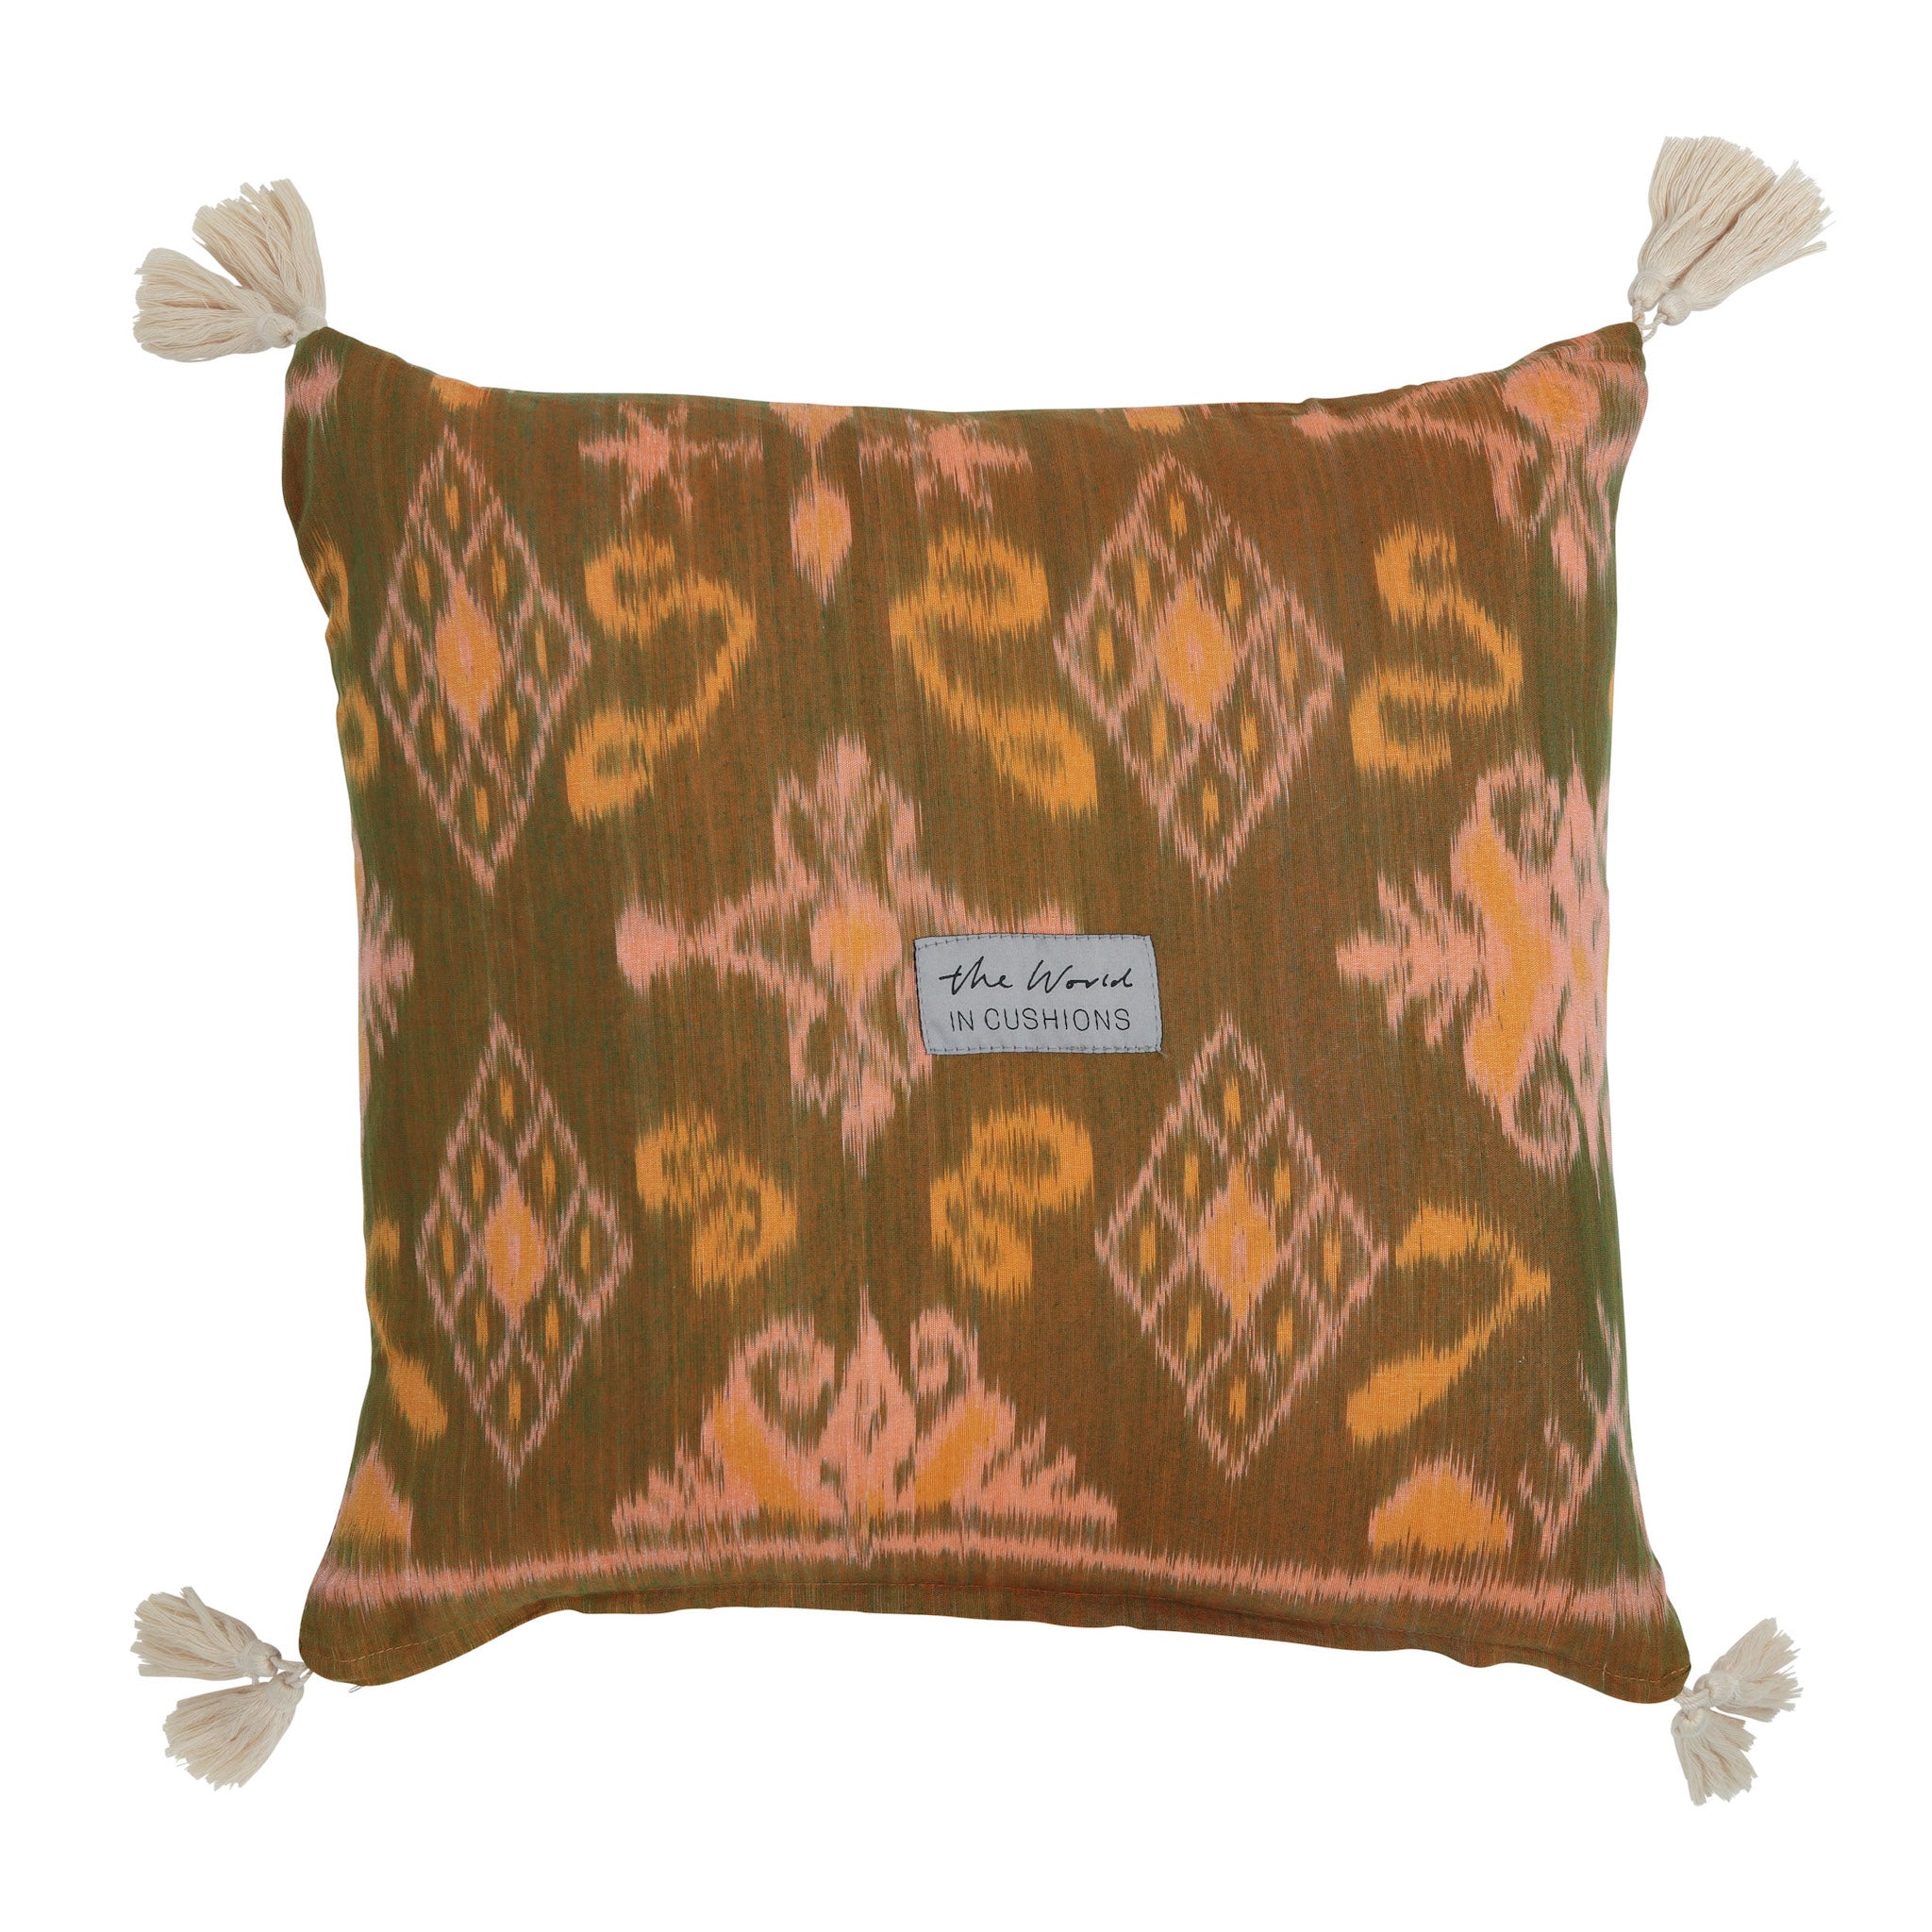 Peach and Olive Green Cotton Ikat Square Scatter Cushion with Tassels from Bali, Indonesia - BACK